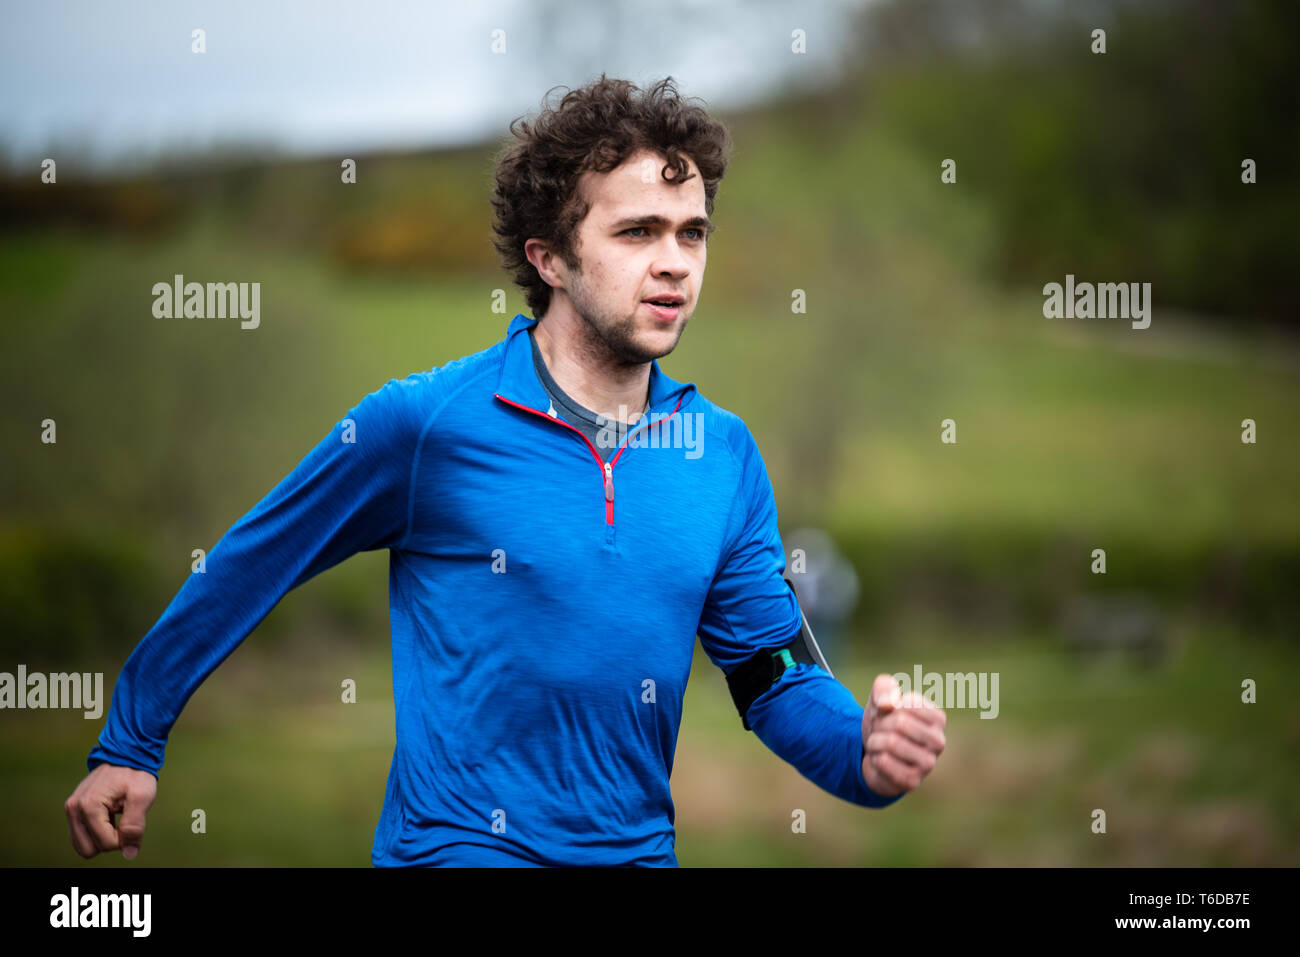 Young man in mid 20s exercising and keeping fit by running in a park Stock Photo